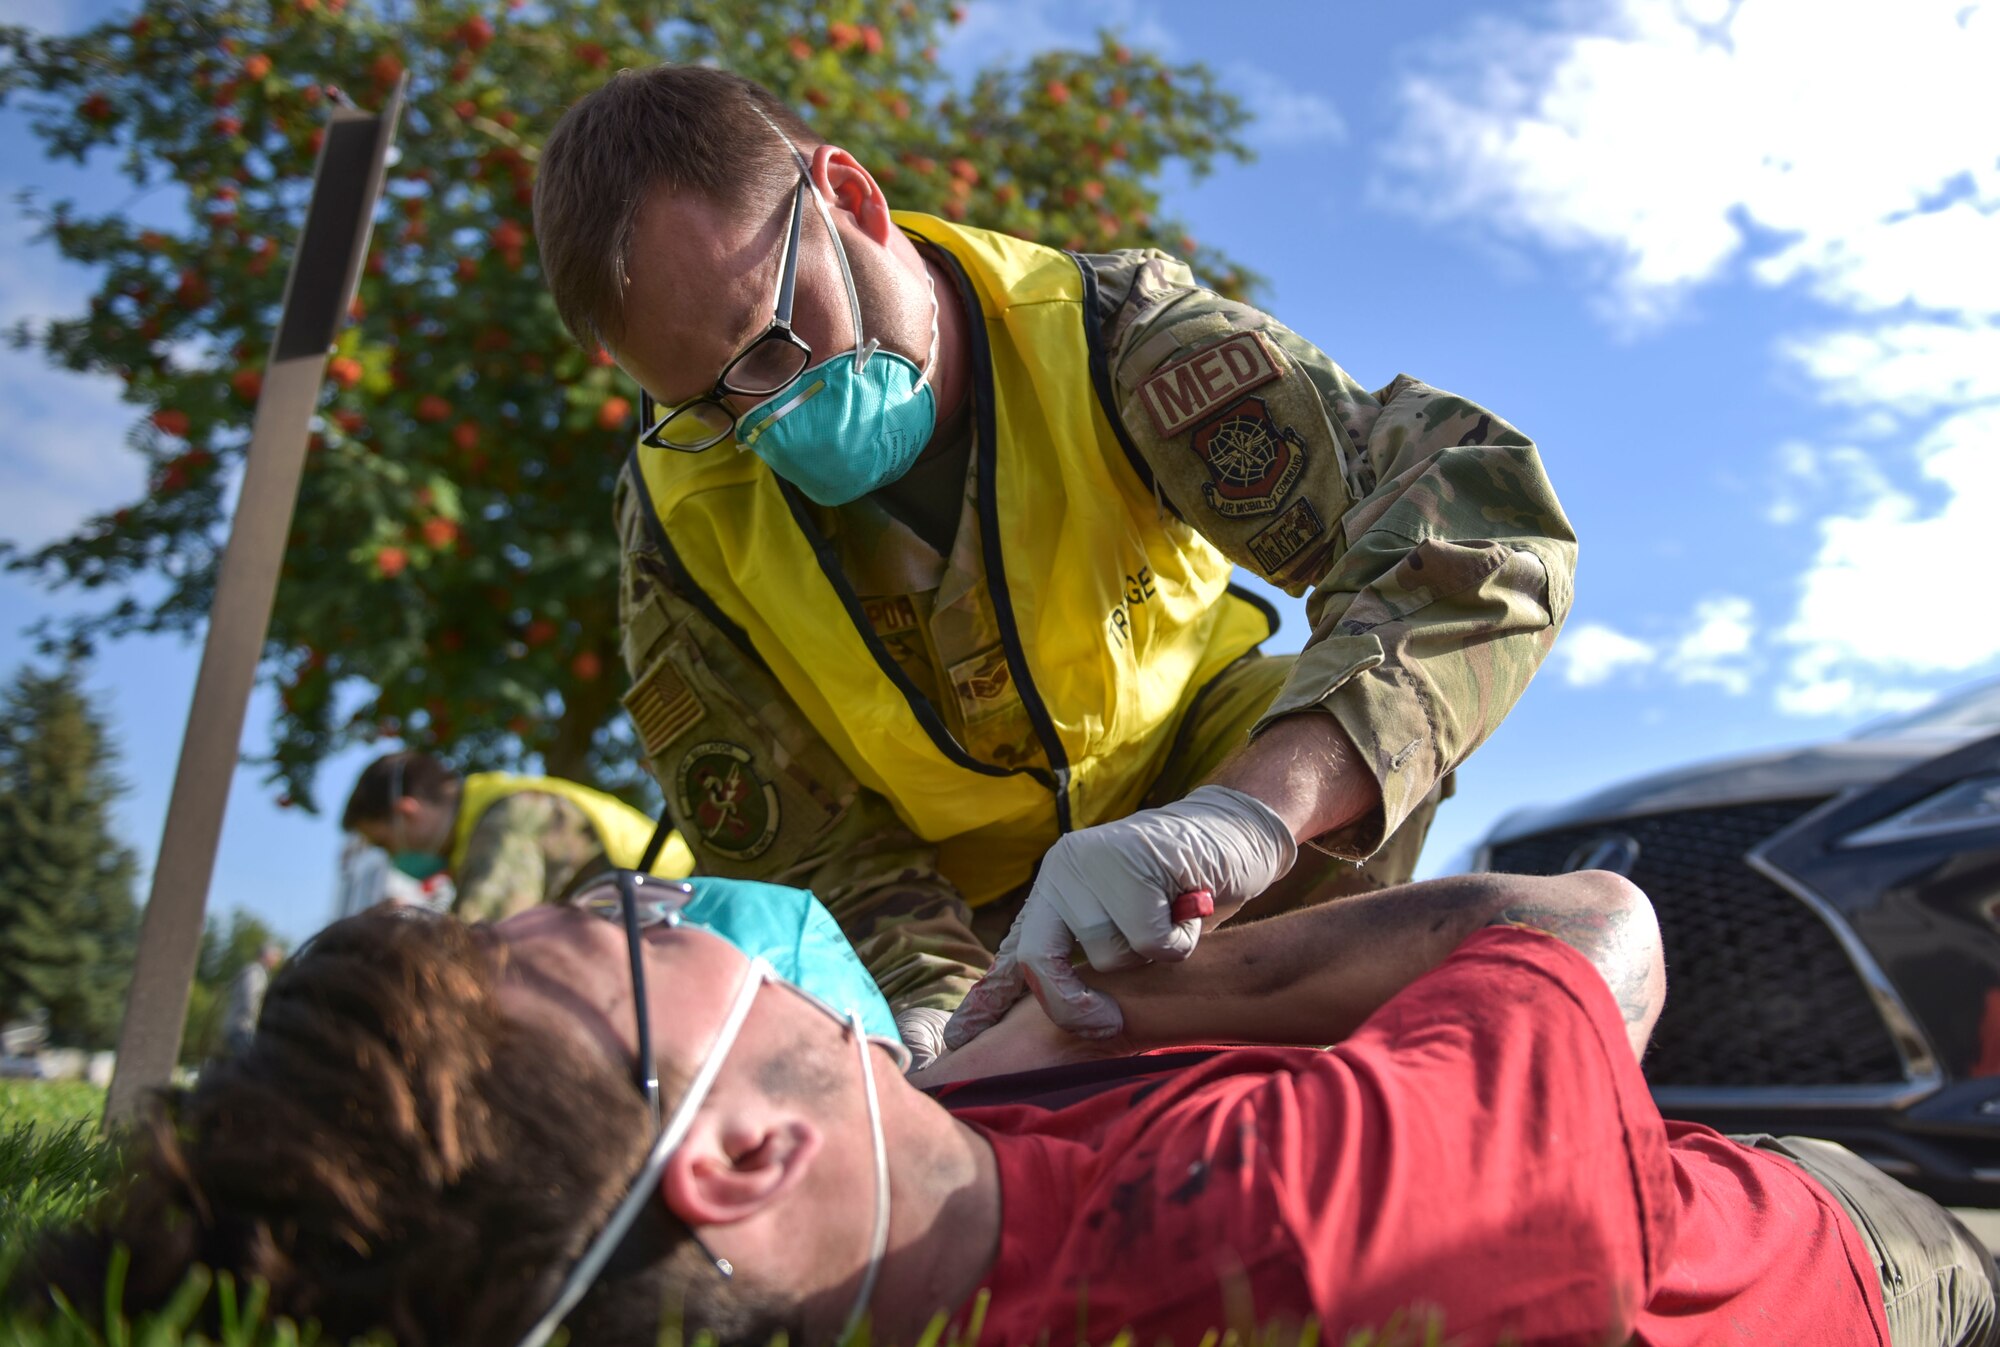 U.S. Air Force Staff Sgt. Donald Davenport, 92nd Operational Medical Readiness Squadron medical technician, treats a simulated patient during Exercise Ready Eagle at Fairchild Air Force Base, Washington, Aug. 27, 2021.